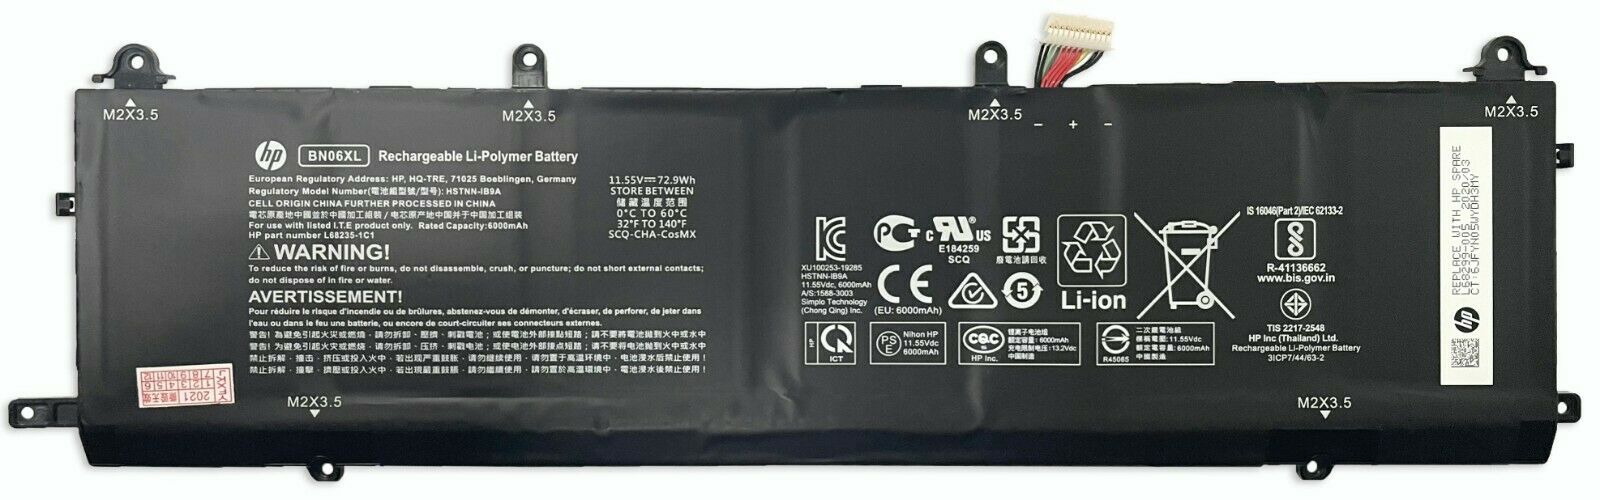 HP Spectre x360 15-eb0900ng Battery 6-cell 72.9Wh